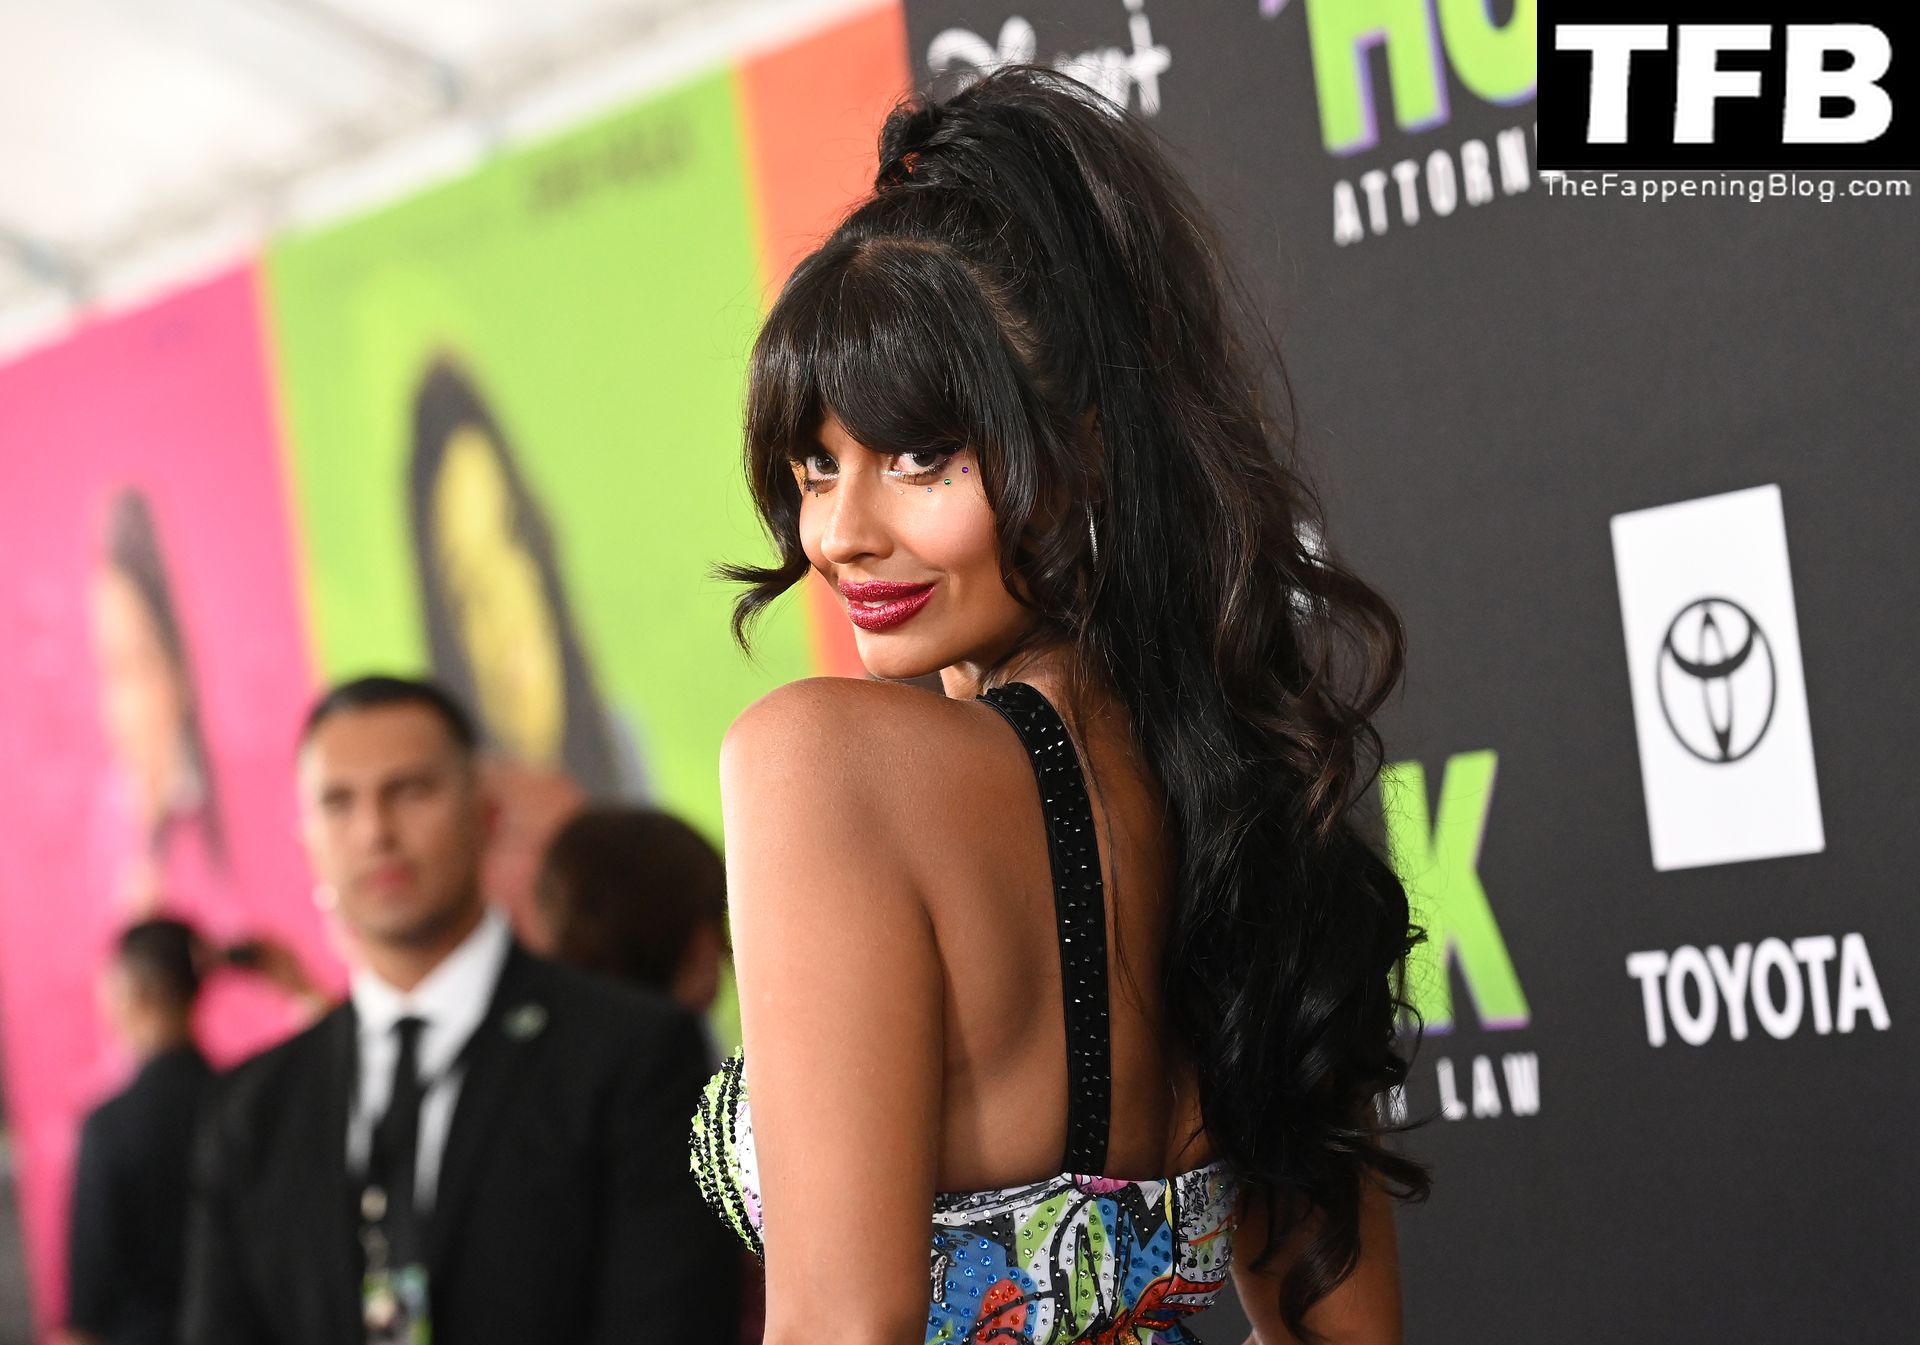 Jameela Jamil Sexy The Fappening Blog 36 - Jameela Jamil Flaunts Her Big Tits at the Premiere of Disney+’s “She Hulk: Attorney at Law” in LA (53 Photos)